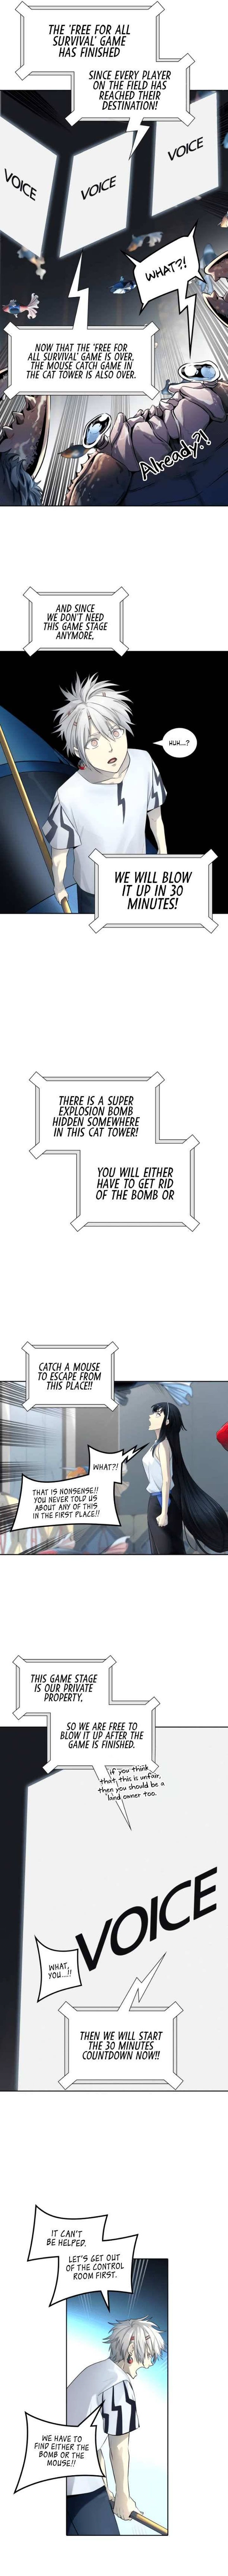 Tower Of God 525 3